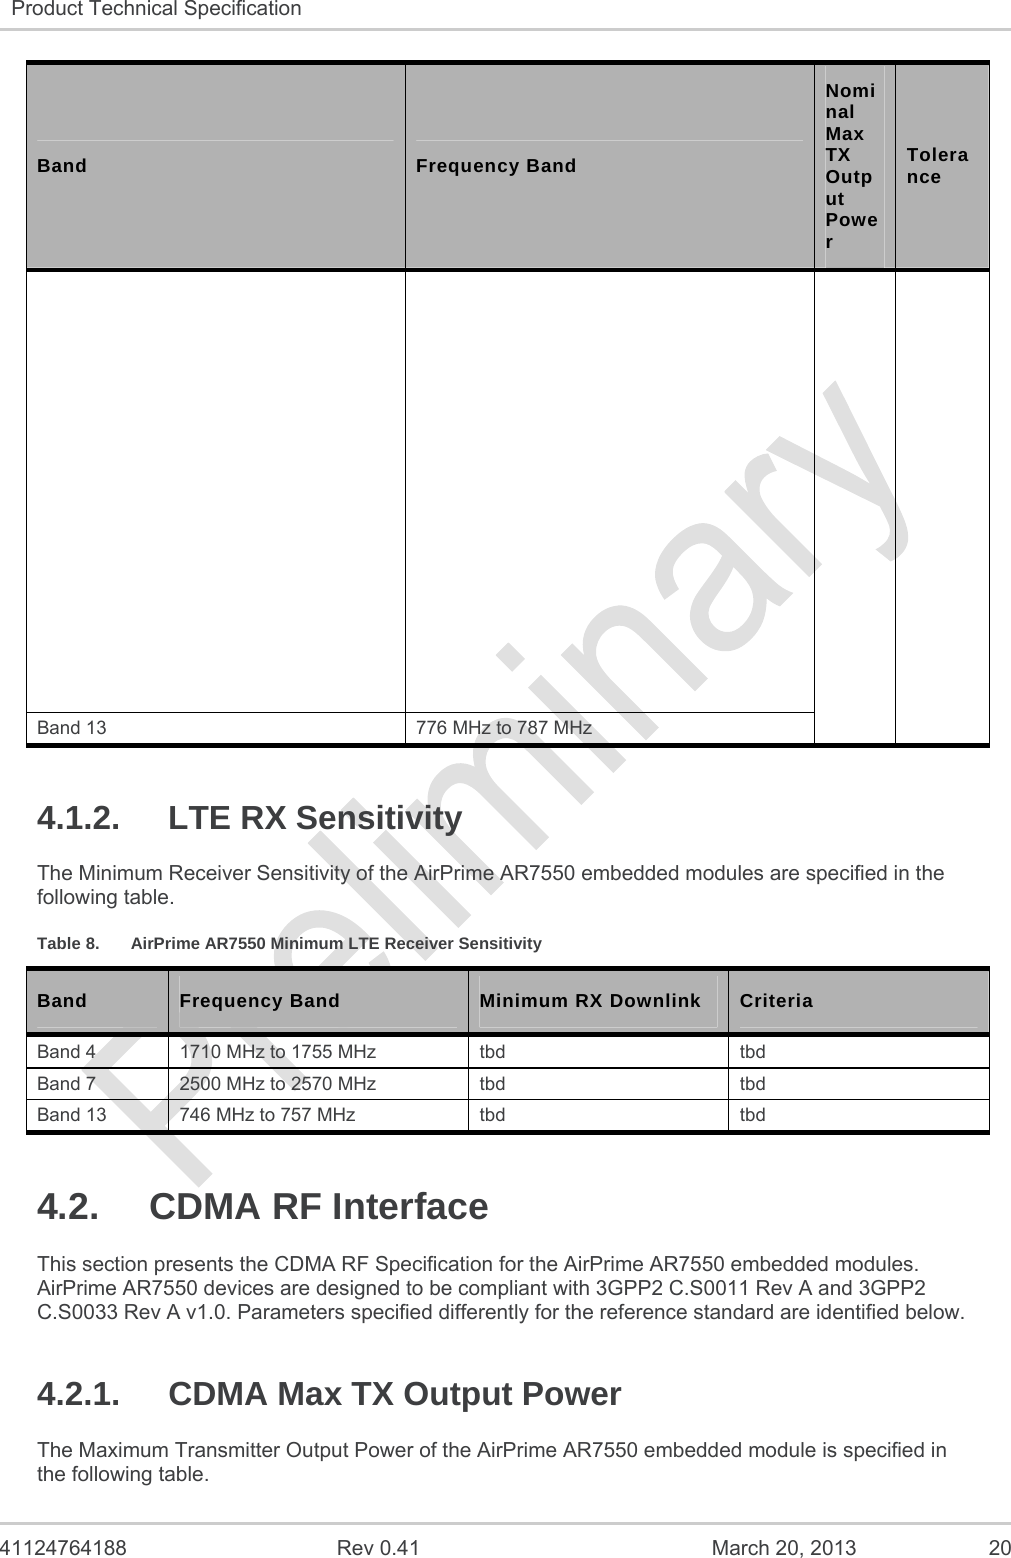   41124764188  Rev 0.41  March 20, 2013  20 Product Technical Specification   Band  Frequency Band Nominal Max TX Output Power Tolerance Band 13  776 MHz to 787 MHz 4.1.2. LTE RX Sensitivity The Minimum Receiver Sensitivity of the AirPrime AR7550 embedded modules are specified in the following table. Table 8.  AirPrime AR7550 Minimum LTE Receiver Sensitivity Band   Frequency Band  Minimum RX Downlink  Criteria Band 4  1710 MHz to 1755 MHz  tbd  tbd Band 7  2500 MHz to 2570 MHz  tbd  tbd Band 13  746 MHz to 757 MHz  tbd  tbd 4.2. CDMA RF Interface This section presents the CDMA RF Specification for the AirPrime AR7550 embedded modules. AirPrime AR7550 devices are designed to be compliant with 3GPP2 C.S0011 Rev A and 3GPP2 C.S0033 Rev A v1.0. Parameters specified differently for the reference standard are identified below. 4.2.1.  CDMA Max TX Output Power The Maximum Transmitter Output Power of the AirPrime AR7550 embedded module is specified in the following table. 